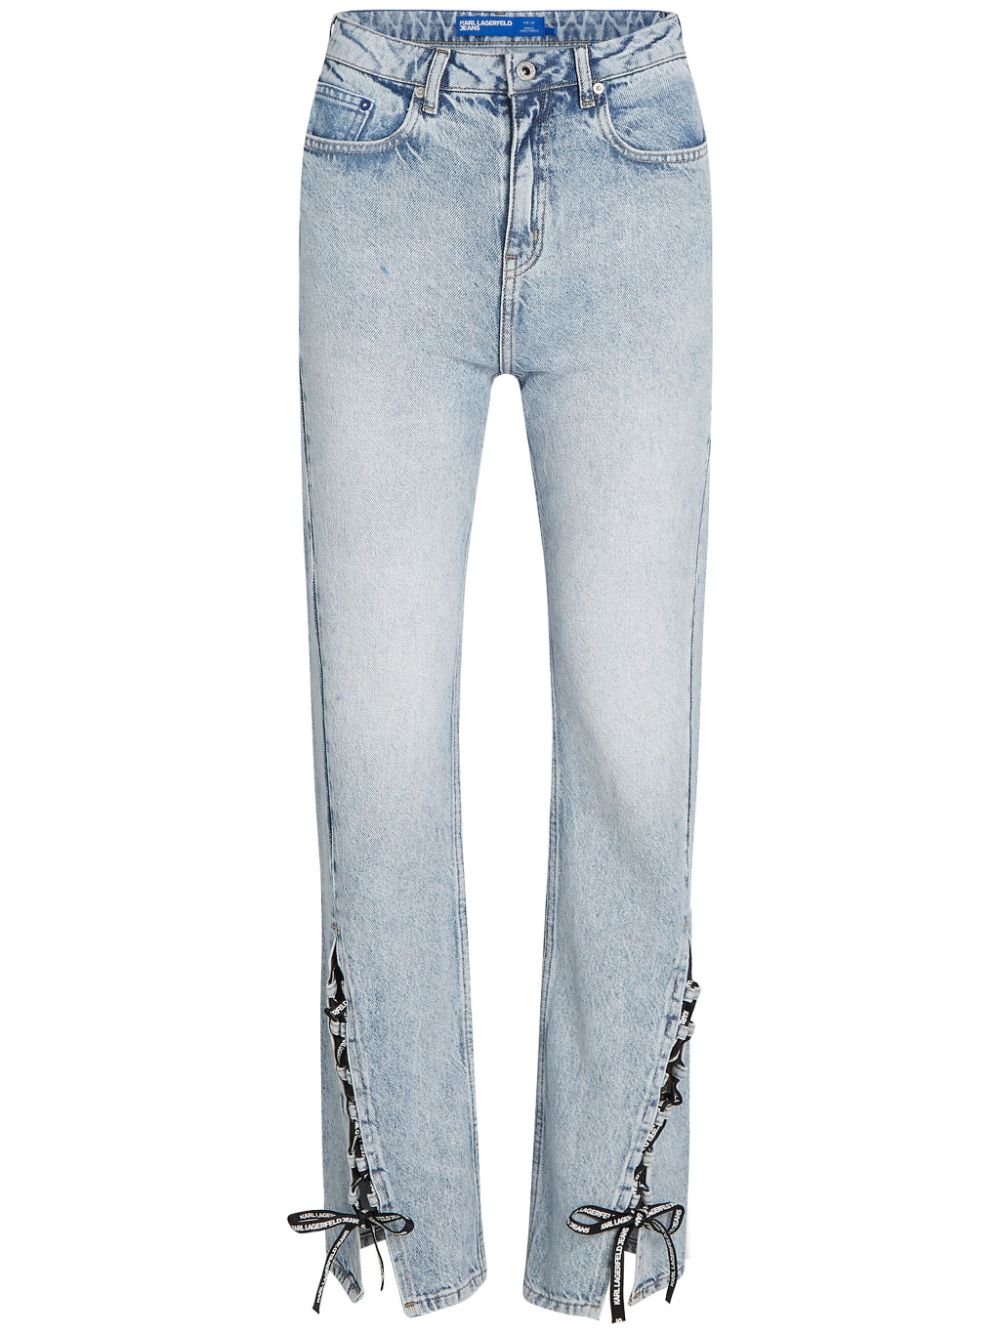 Karl Lagerfeld Jeans high-rise lace-up jeans - Blue von Karl Lagerfeld Jeans